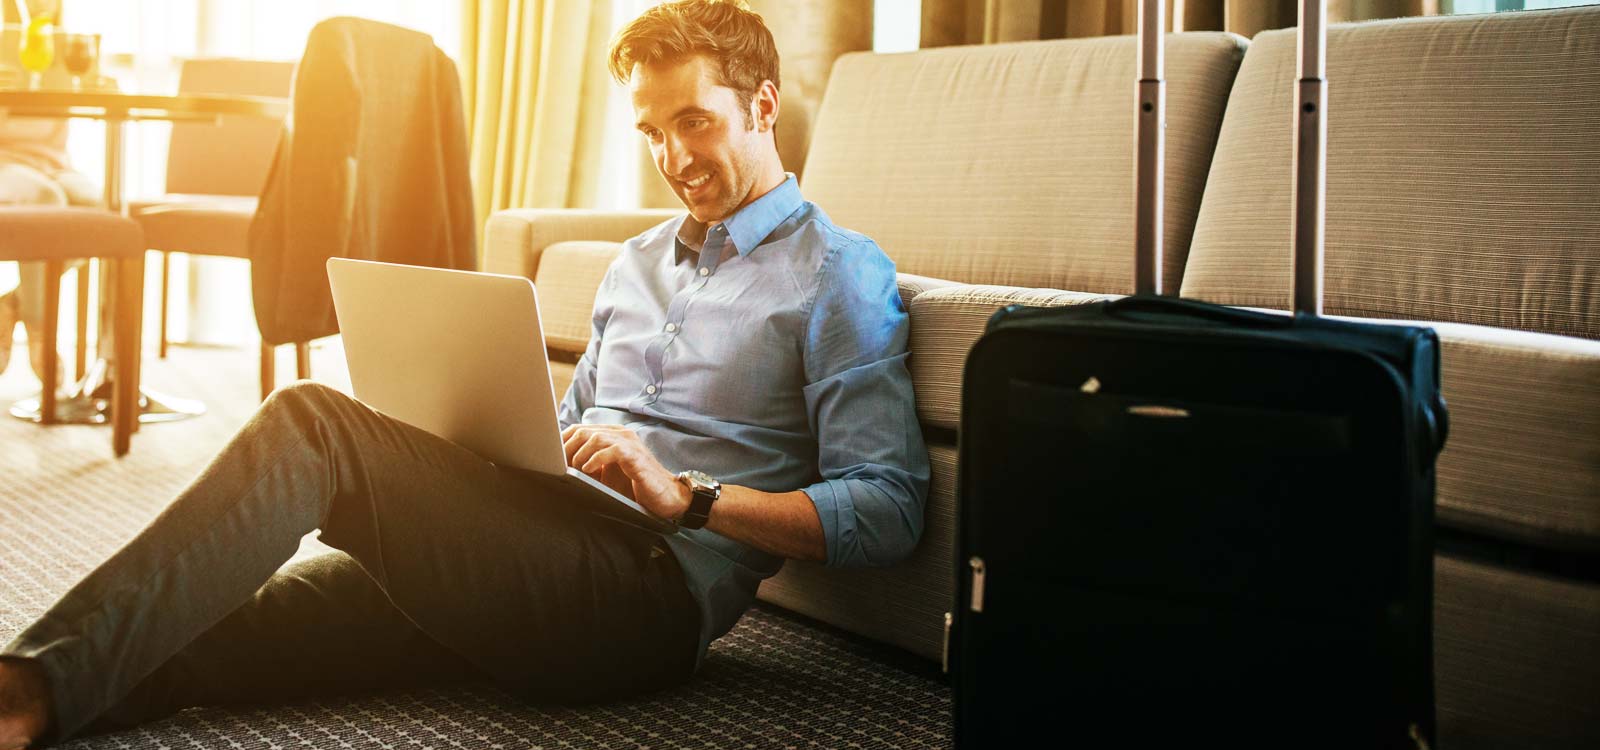 Services for business travelers